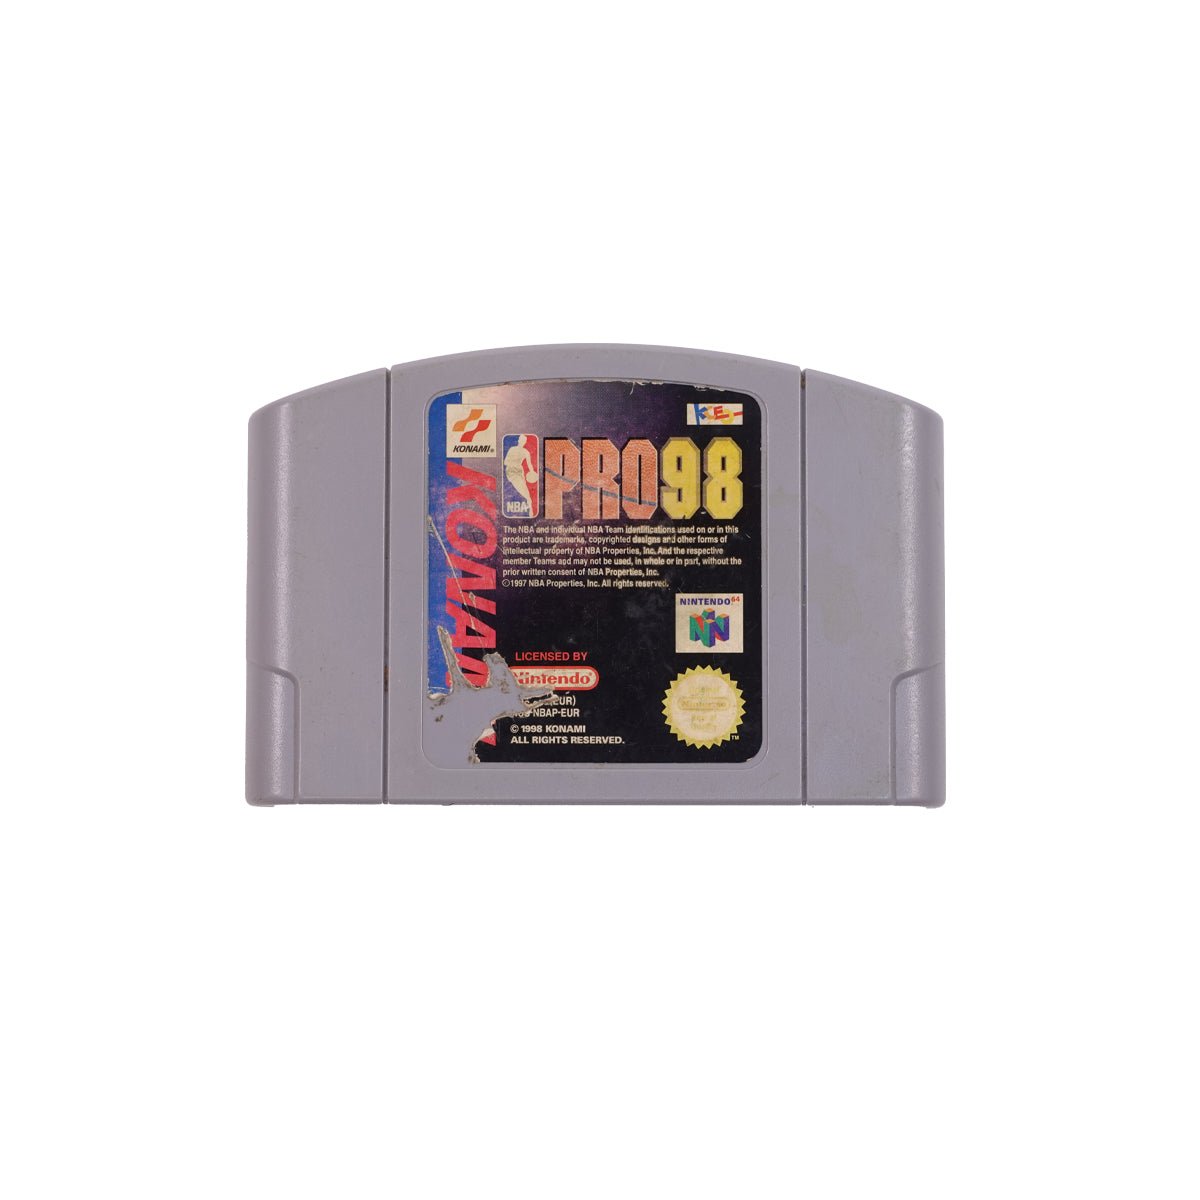 (Pre-Owned) NBA Pro 98 Video Game For Nintendo 64 - ريترو - Store 974 | ستور ٩٧٤